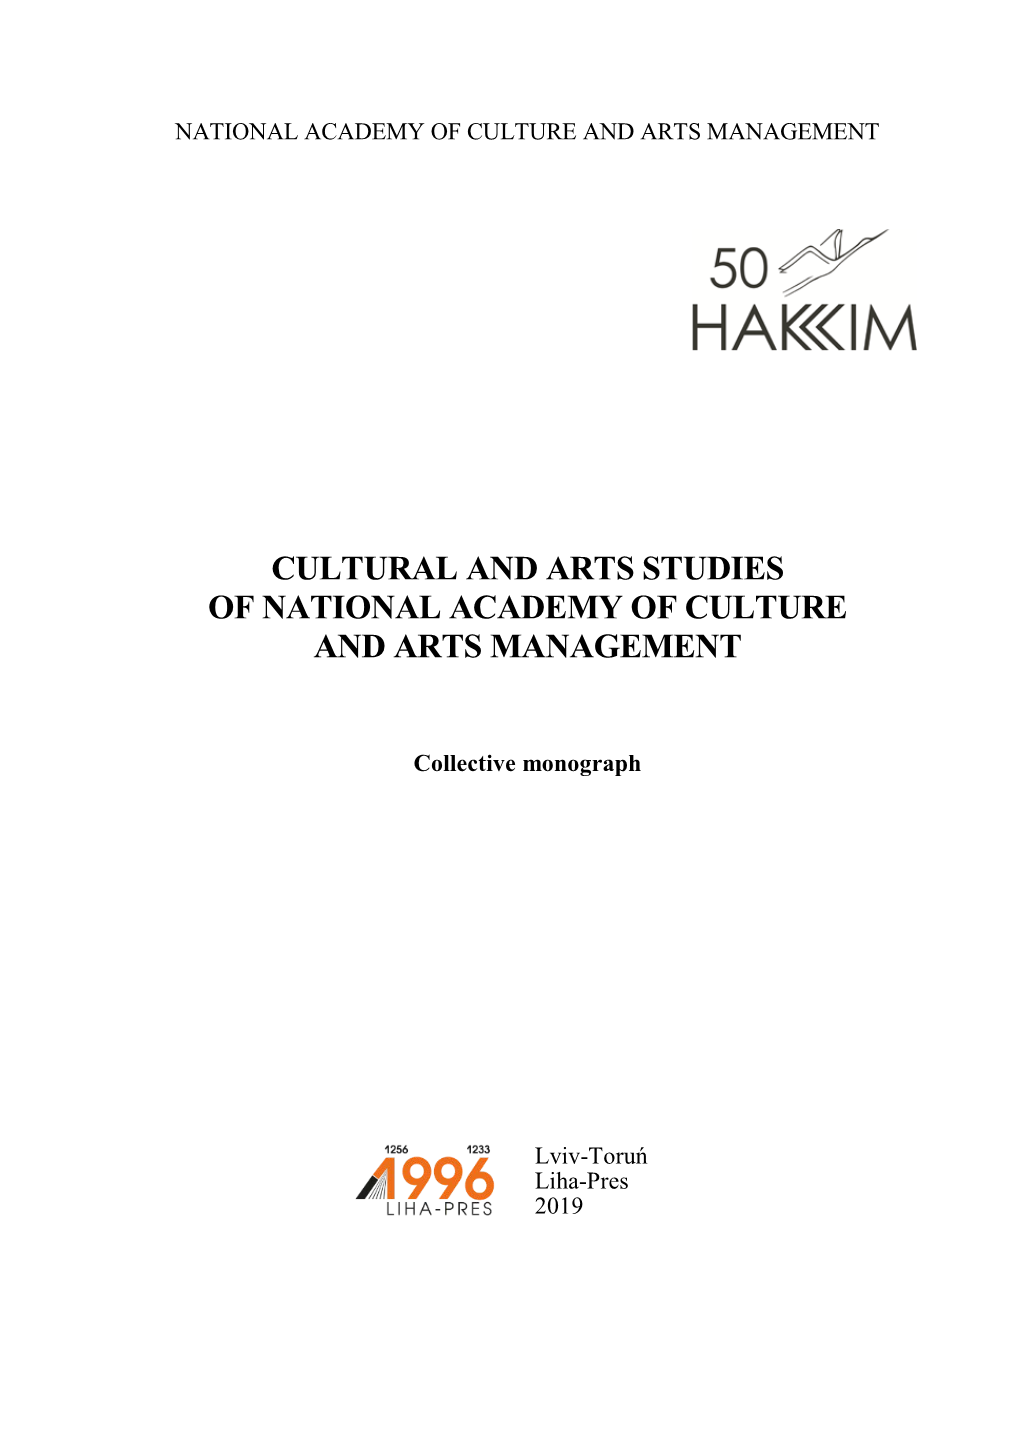 Cultural and Arts Studies of National Academy of Culture and Arts Management